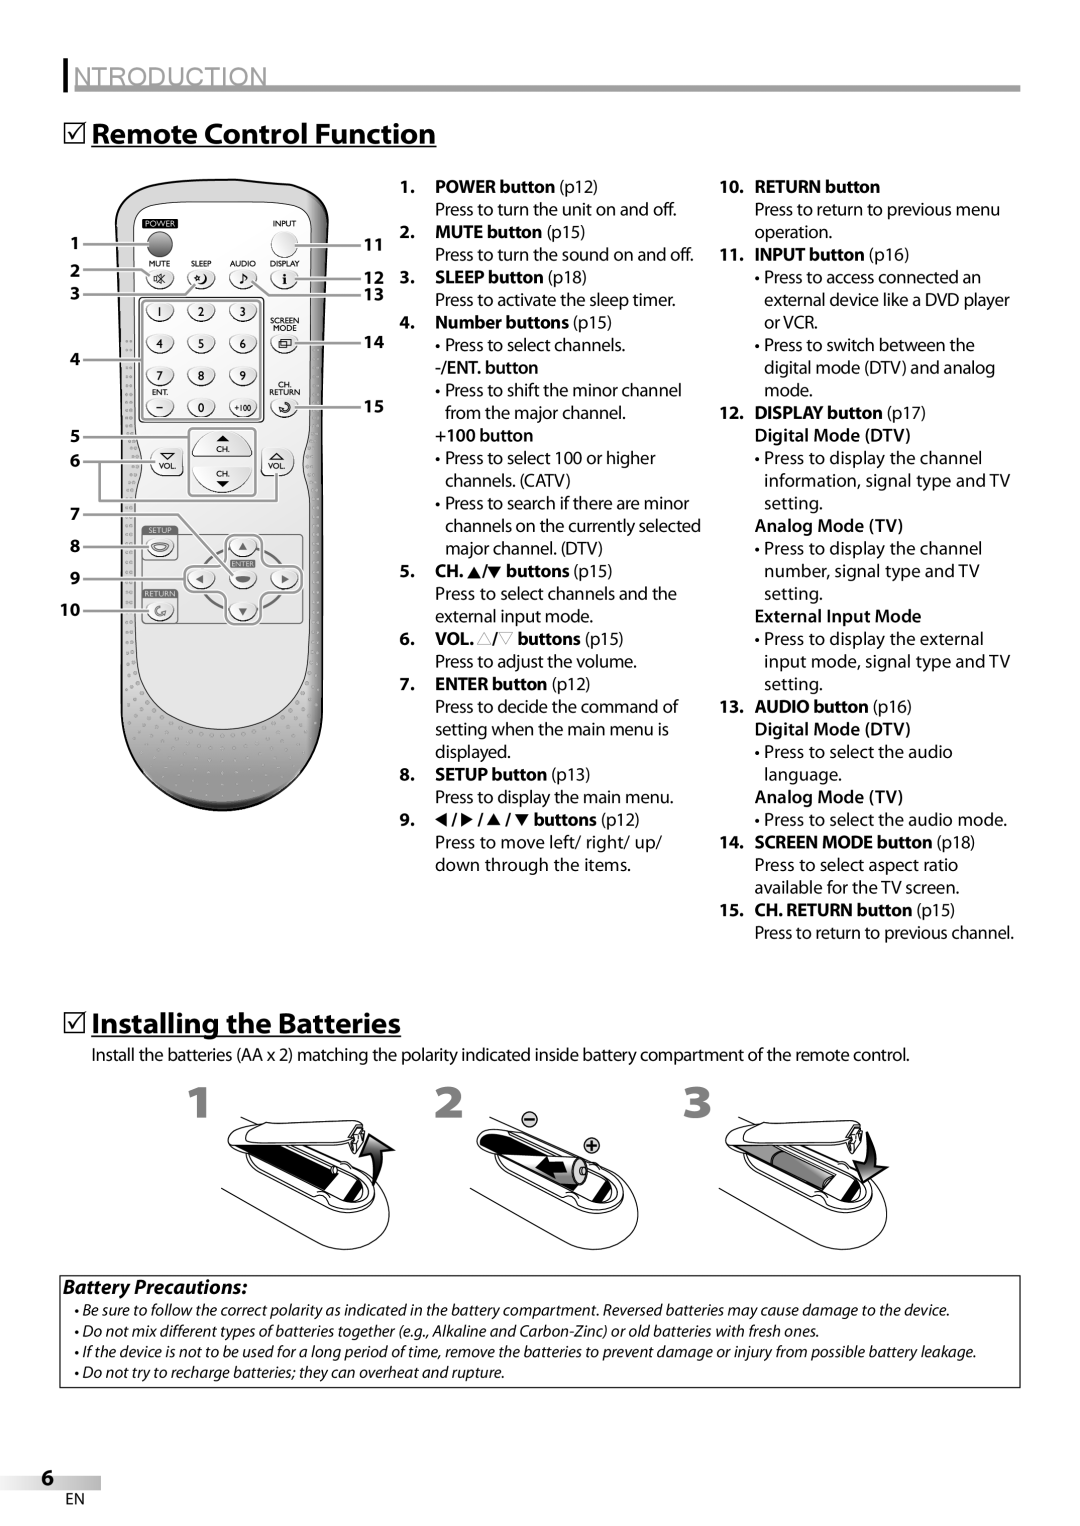 Sylvania LC200SL8A owner manual Remote Control Function, Installing the Batteries, Introduction, Battery Precautions 